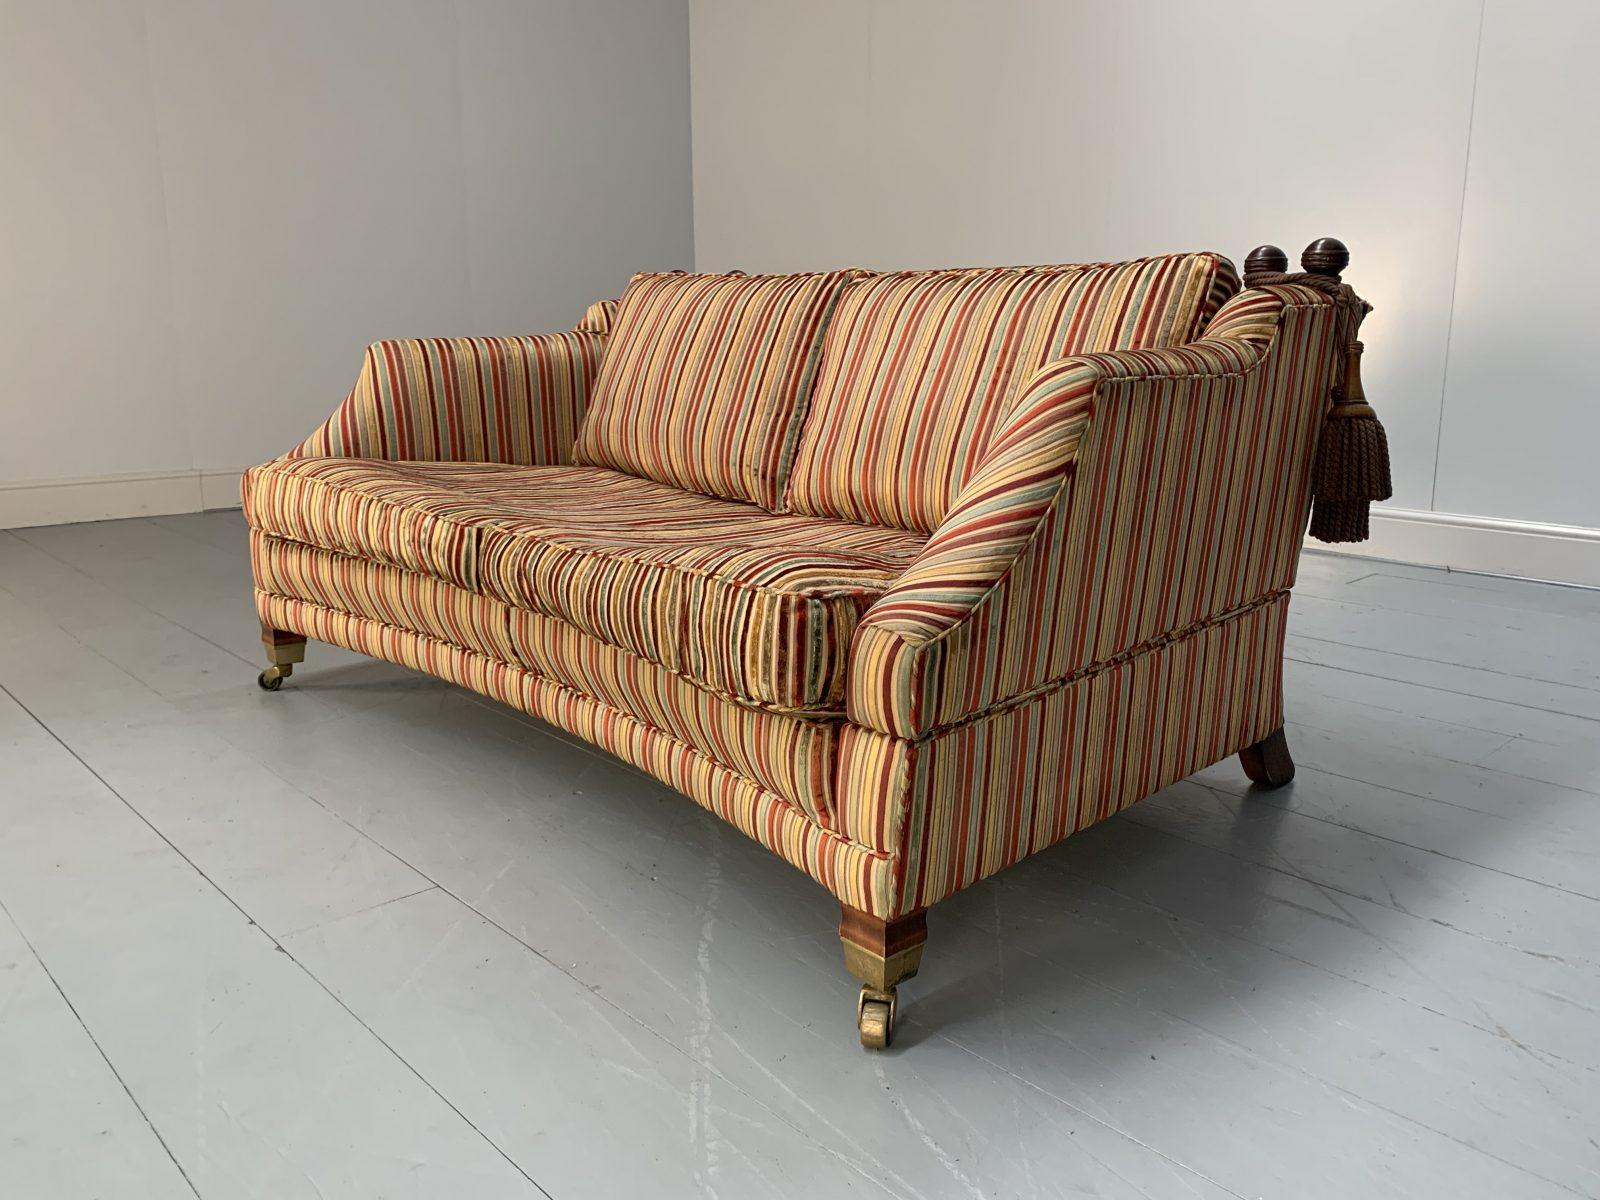 This is a superb, majestic Duresta “Hornblower” Large Cushion-Back 2.5-Seat Sofa, dressed in their stunning, tactile and unashamedly luxurious striped-velvet fabric in a myriad of bold, vibrant colours against a gold-background.

In a world of